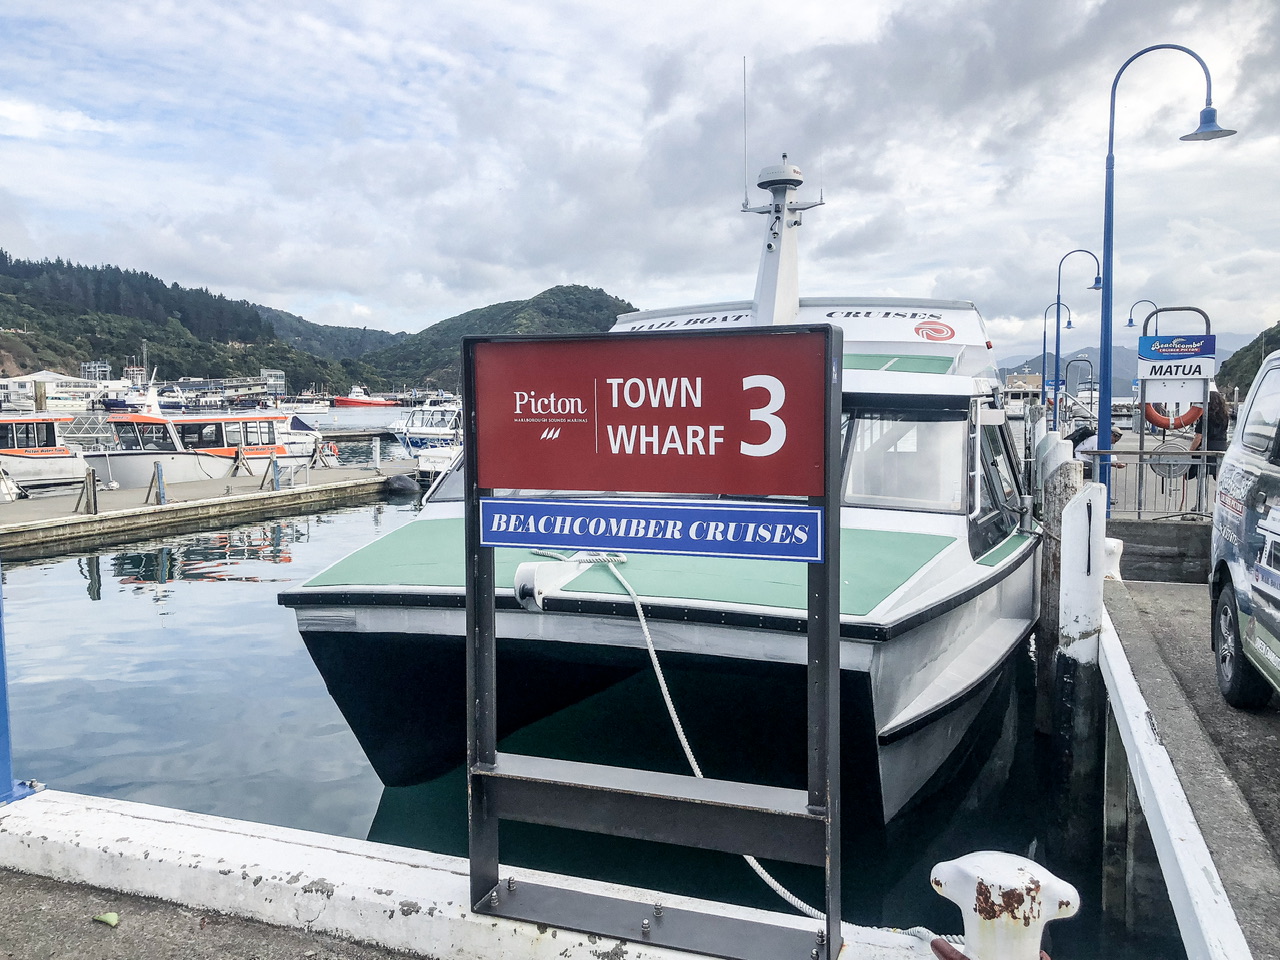 Medium sized boar parked at the end of a marina. Sign in front of it says “Picton Town Wharf 3, Beachcomber Cruises”